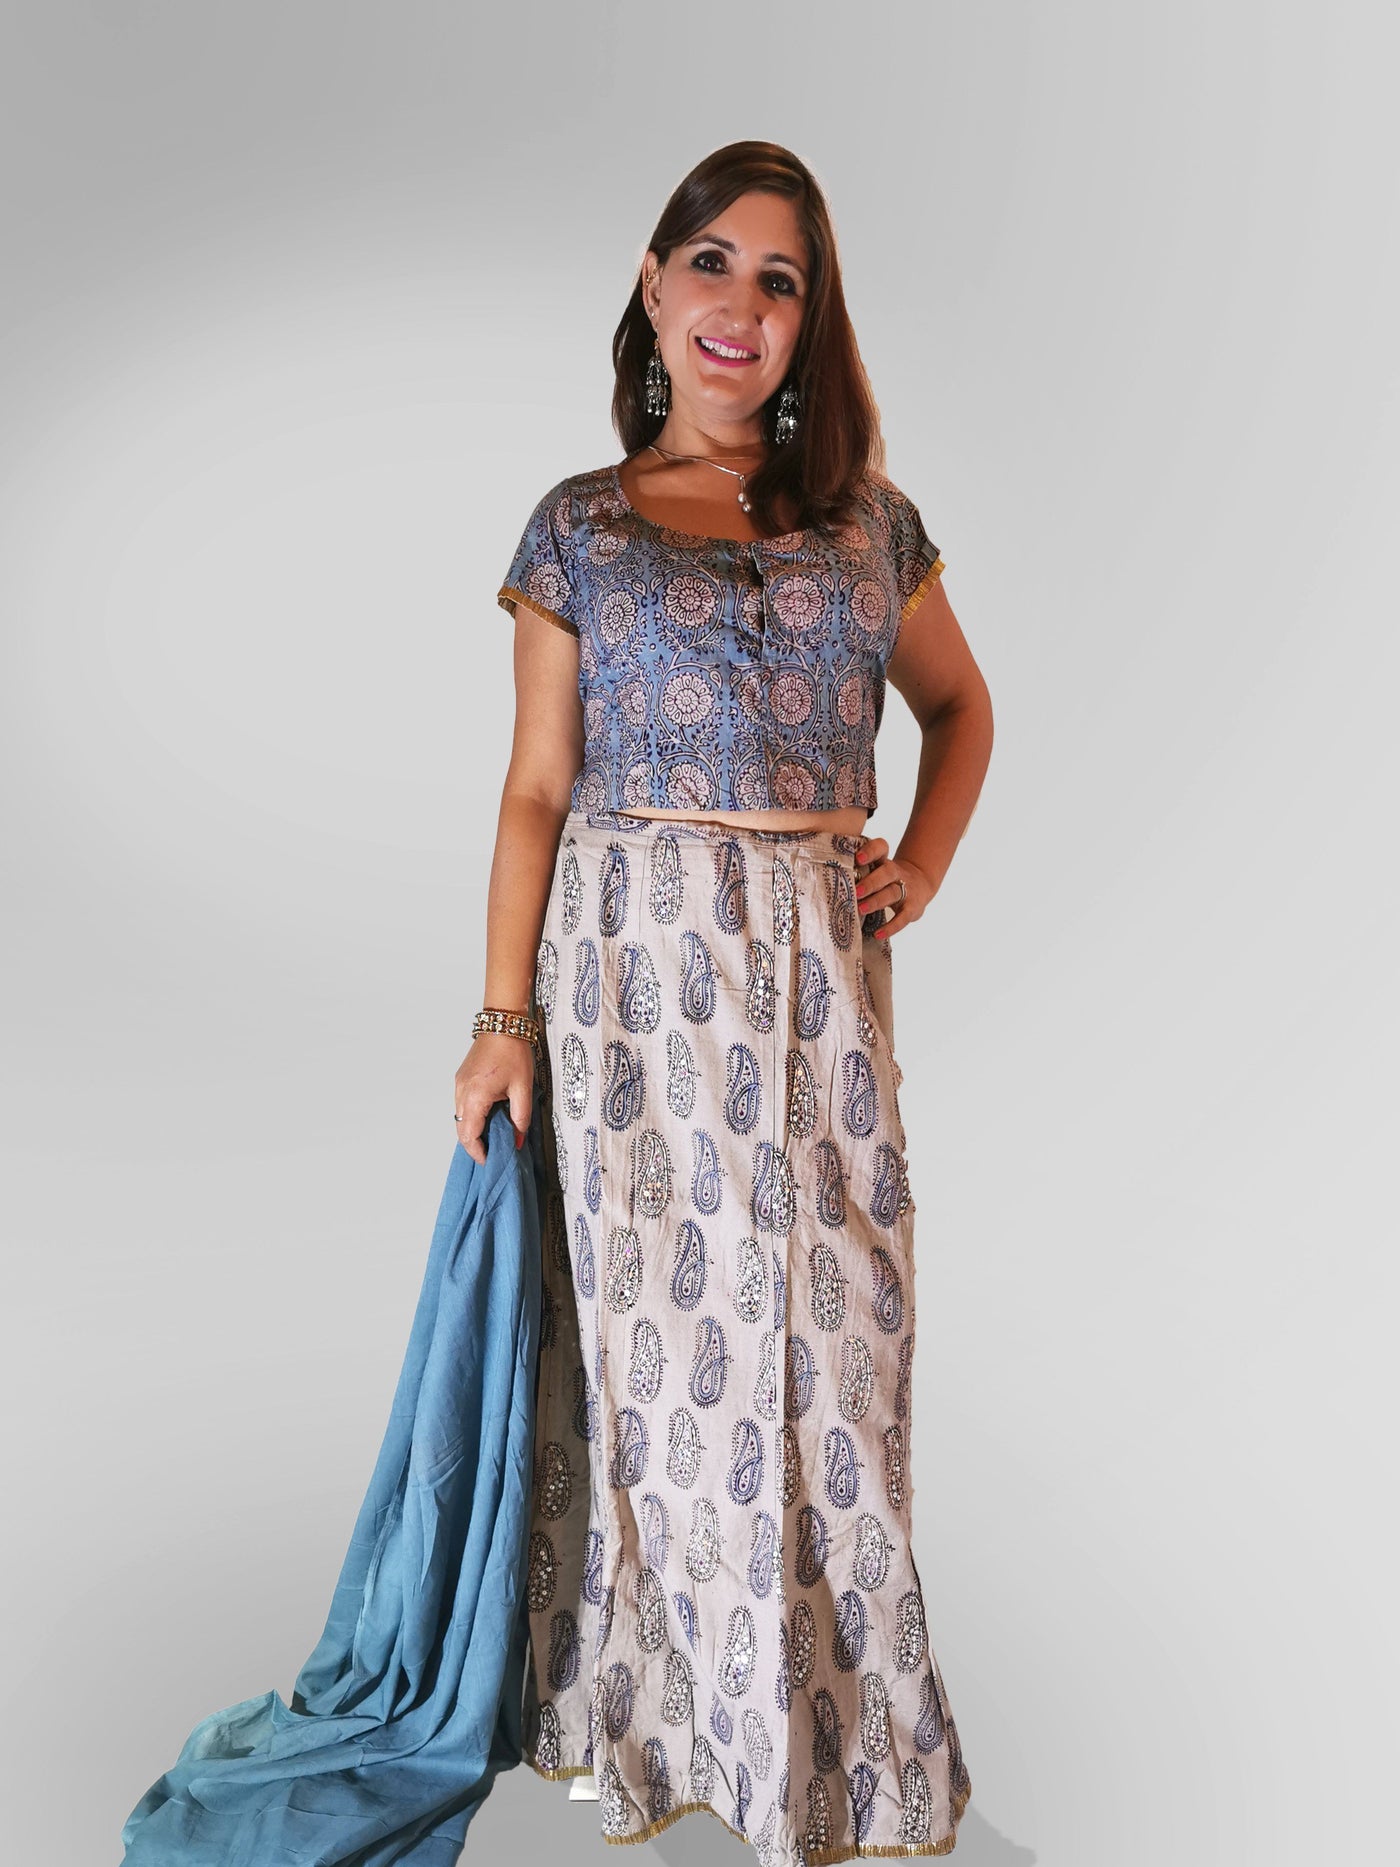 Sky Blue Cotton Lehenga - Indian Clothing in Denver, CO, Aurora, CO, Boulder, CO, Fort Collins, CO, Colorado Springs, CO, Parker, CO, Highlands Ranch, CO, Cherry Creek, CO, Centennial, CO, and Longmont, CO. Nationwide shipping USA - India Fashion X